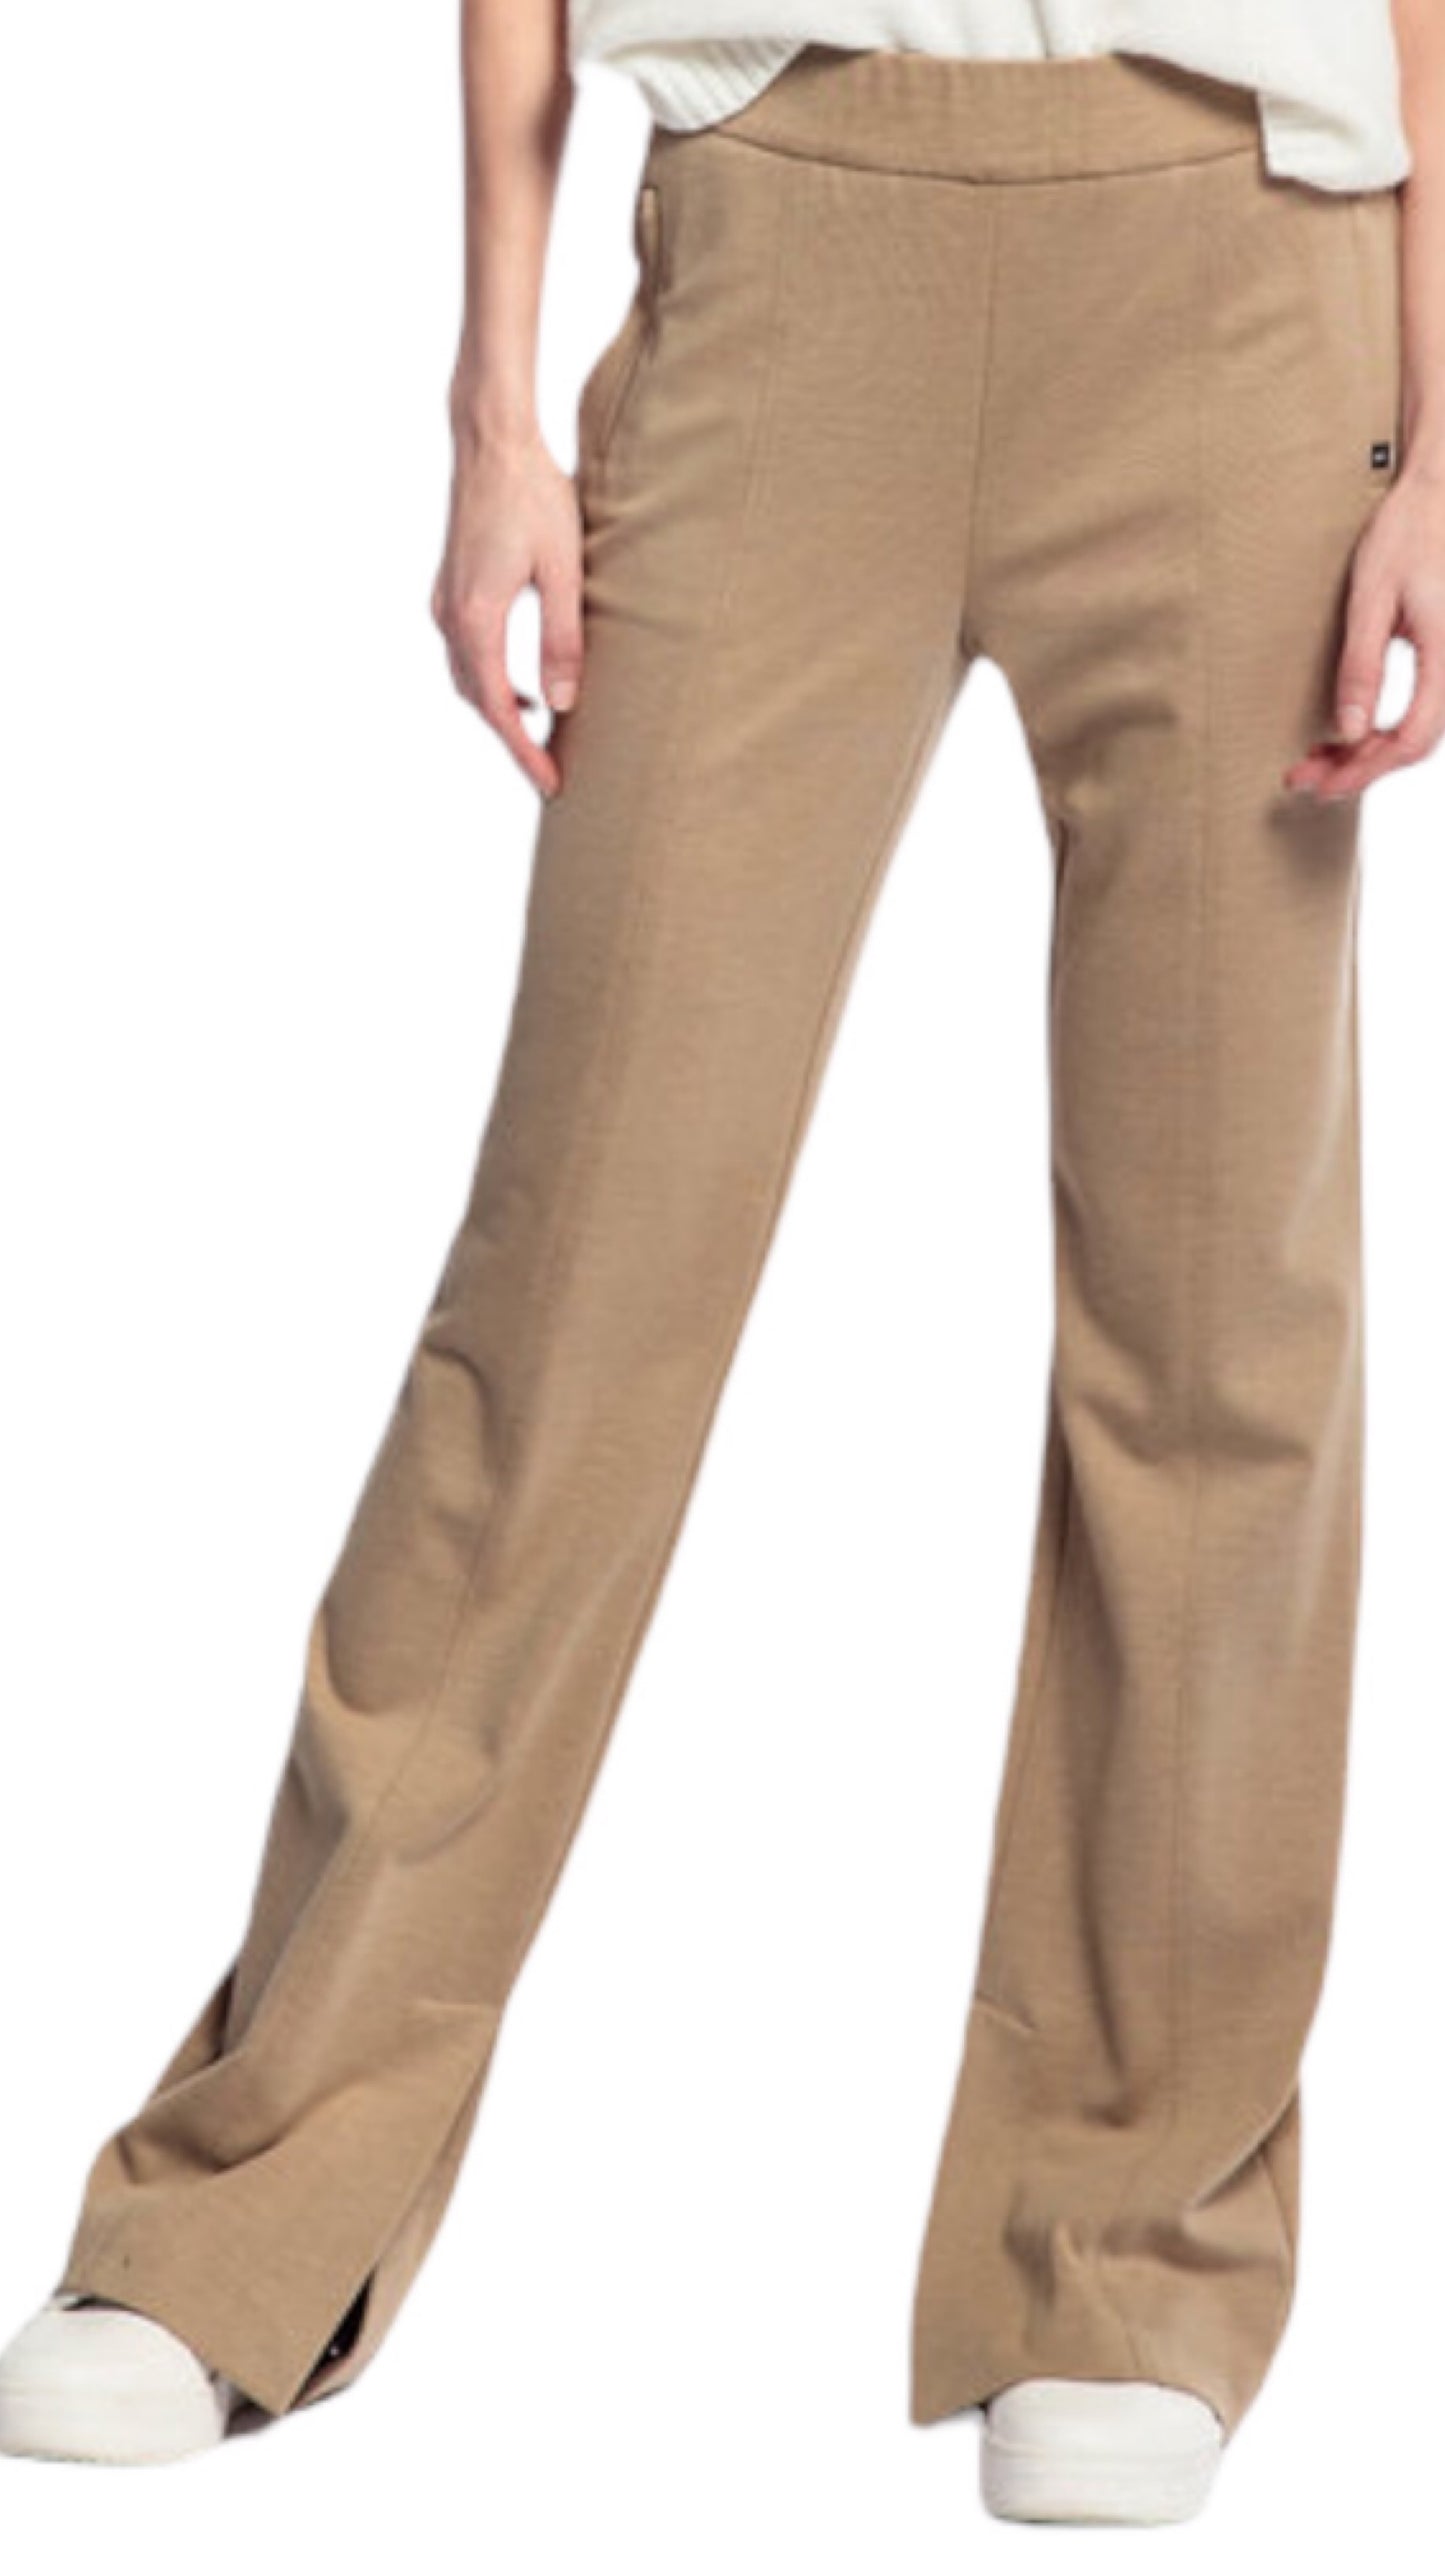 Double jersey pants straight